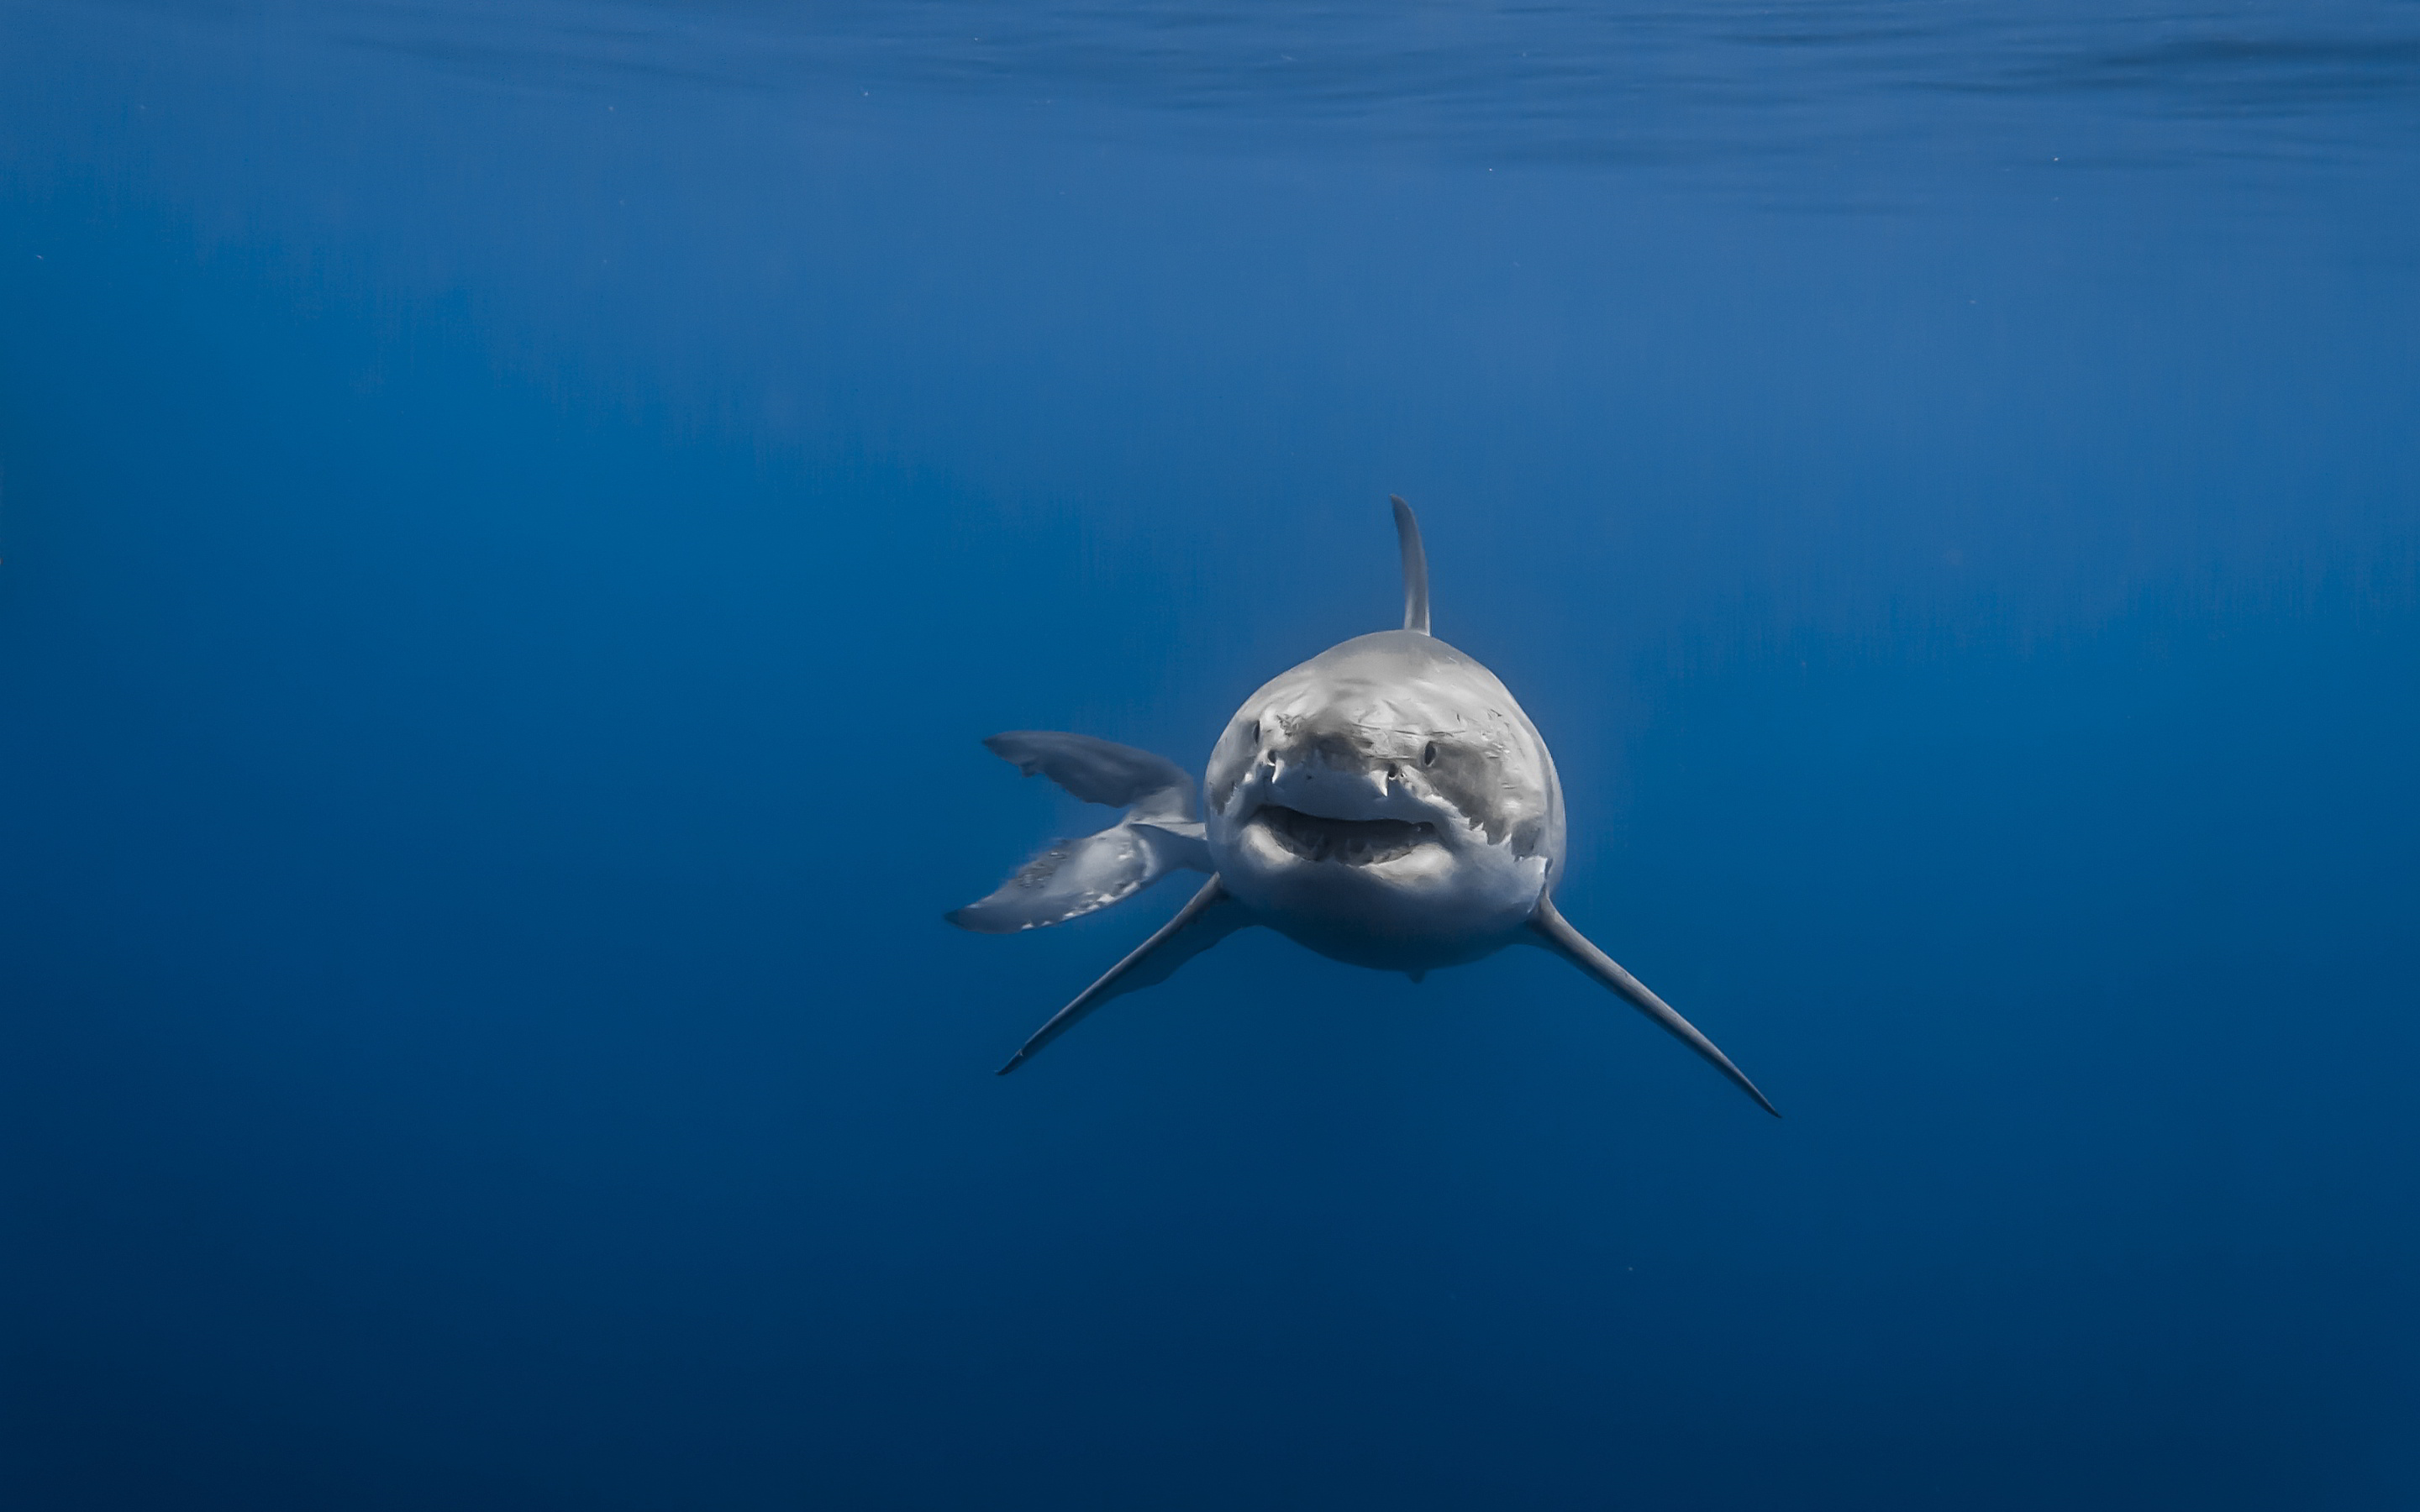 Great White Shark: Have a torpedo-shaped body with a pointed snout and powerful jaws. 2880x1800 HD Wallpaper.